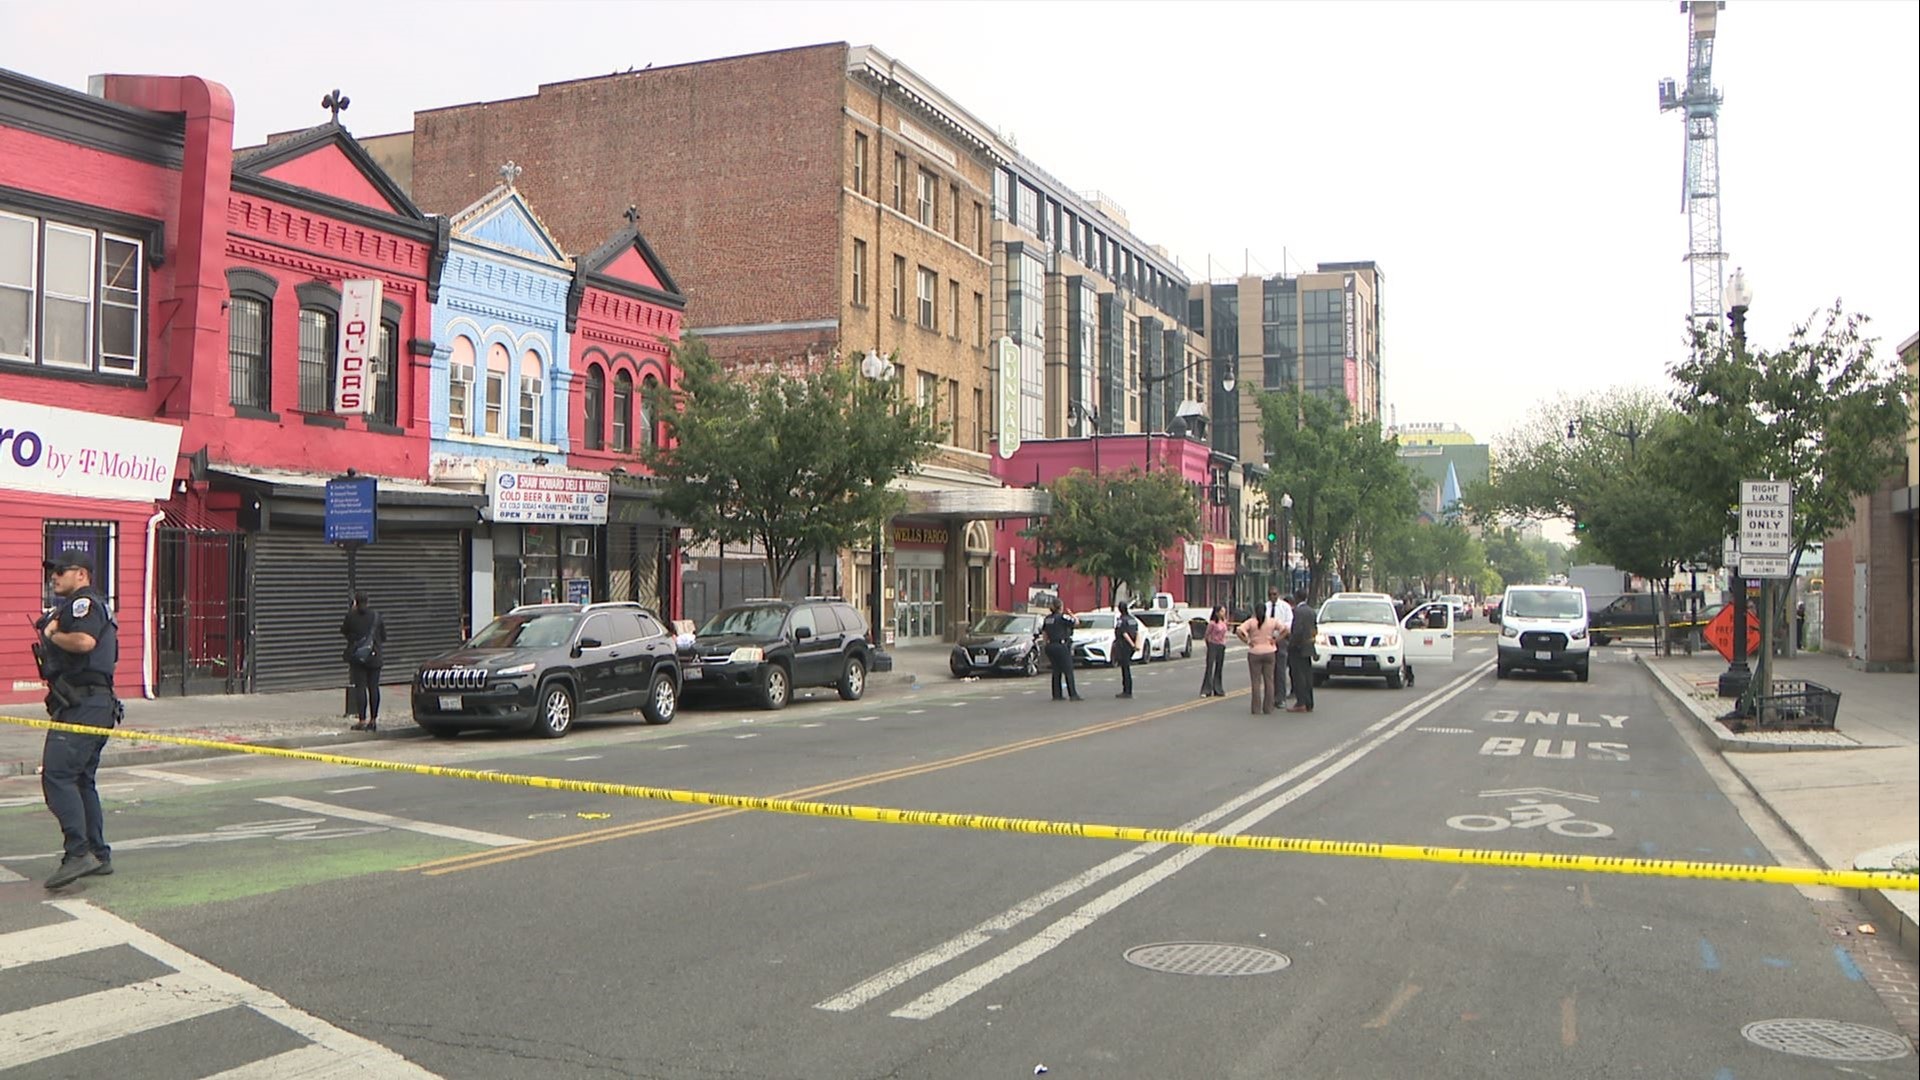 Police are investigating after a fight between three men led to a deadly shooting in Northwest D.C. on Thursday.